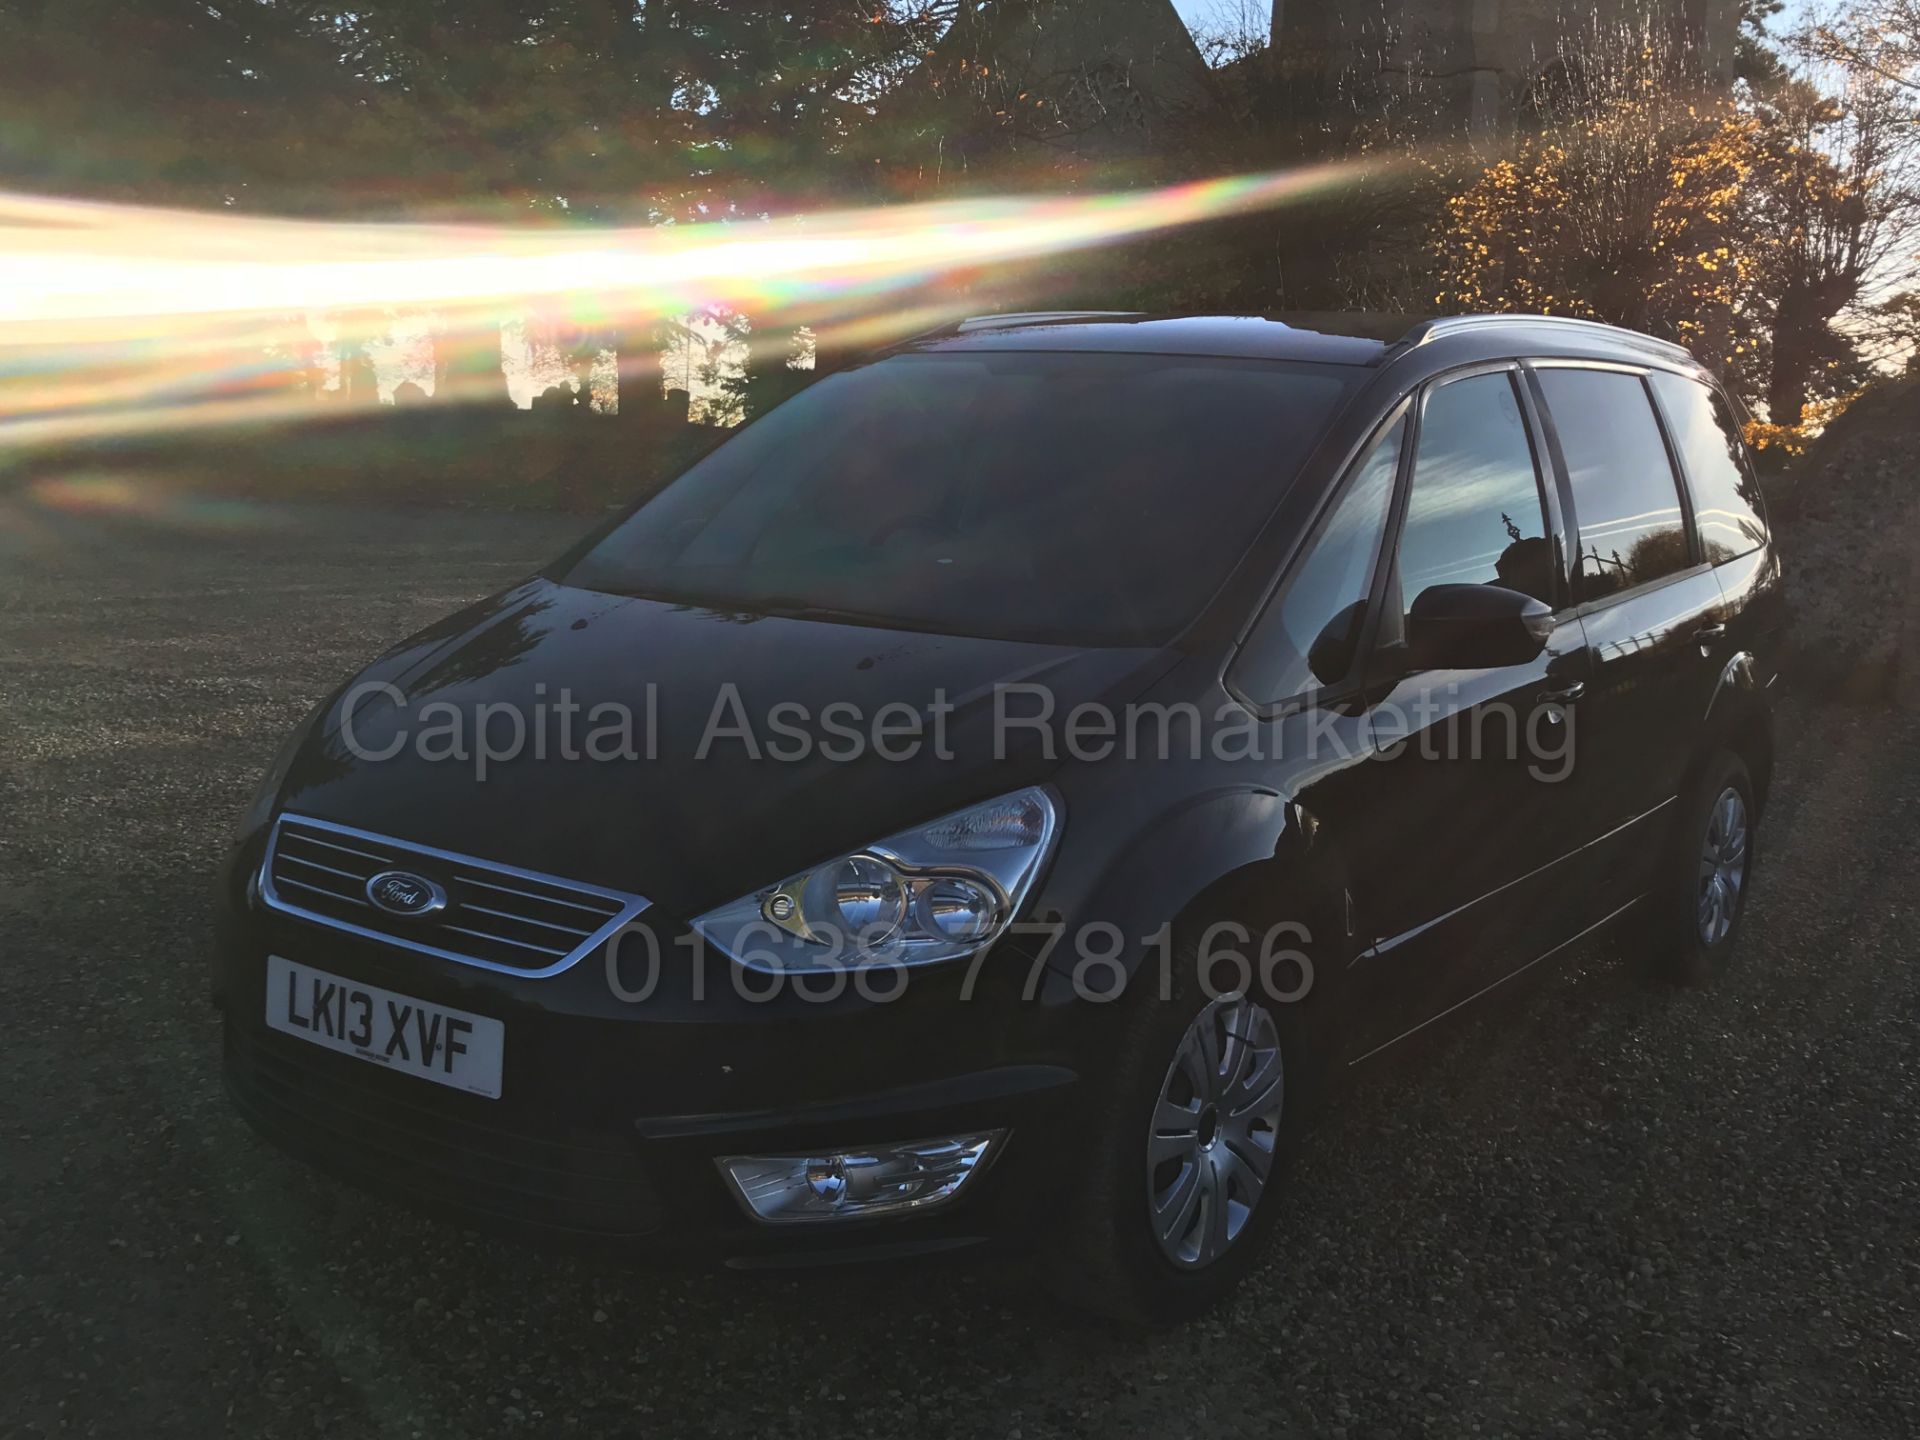 (On Sale) FORD GALAXY 'ZETEC' 7 SEATER MPV (2013) '2.0 TDCI -140 BHP' (1 OWNER) *FULL HISTORY* - Image 5 of 29